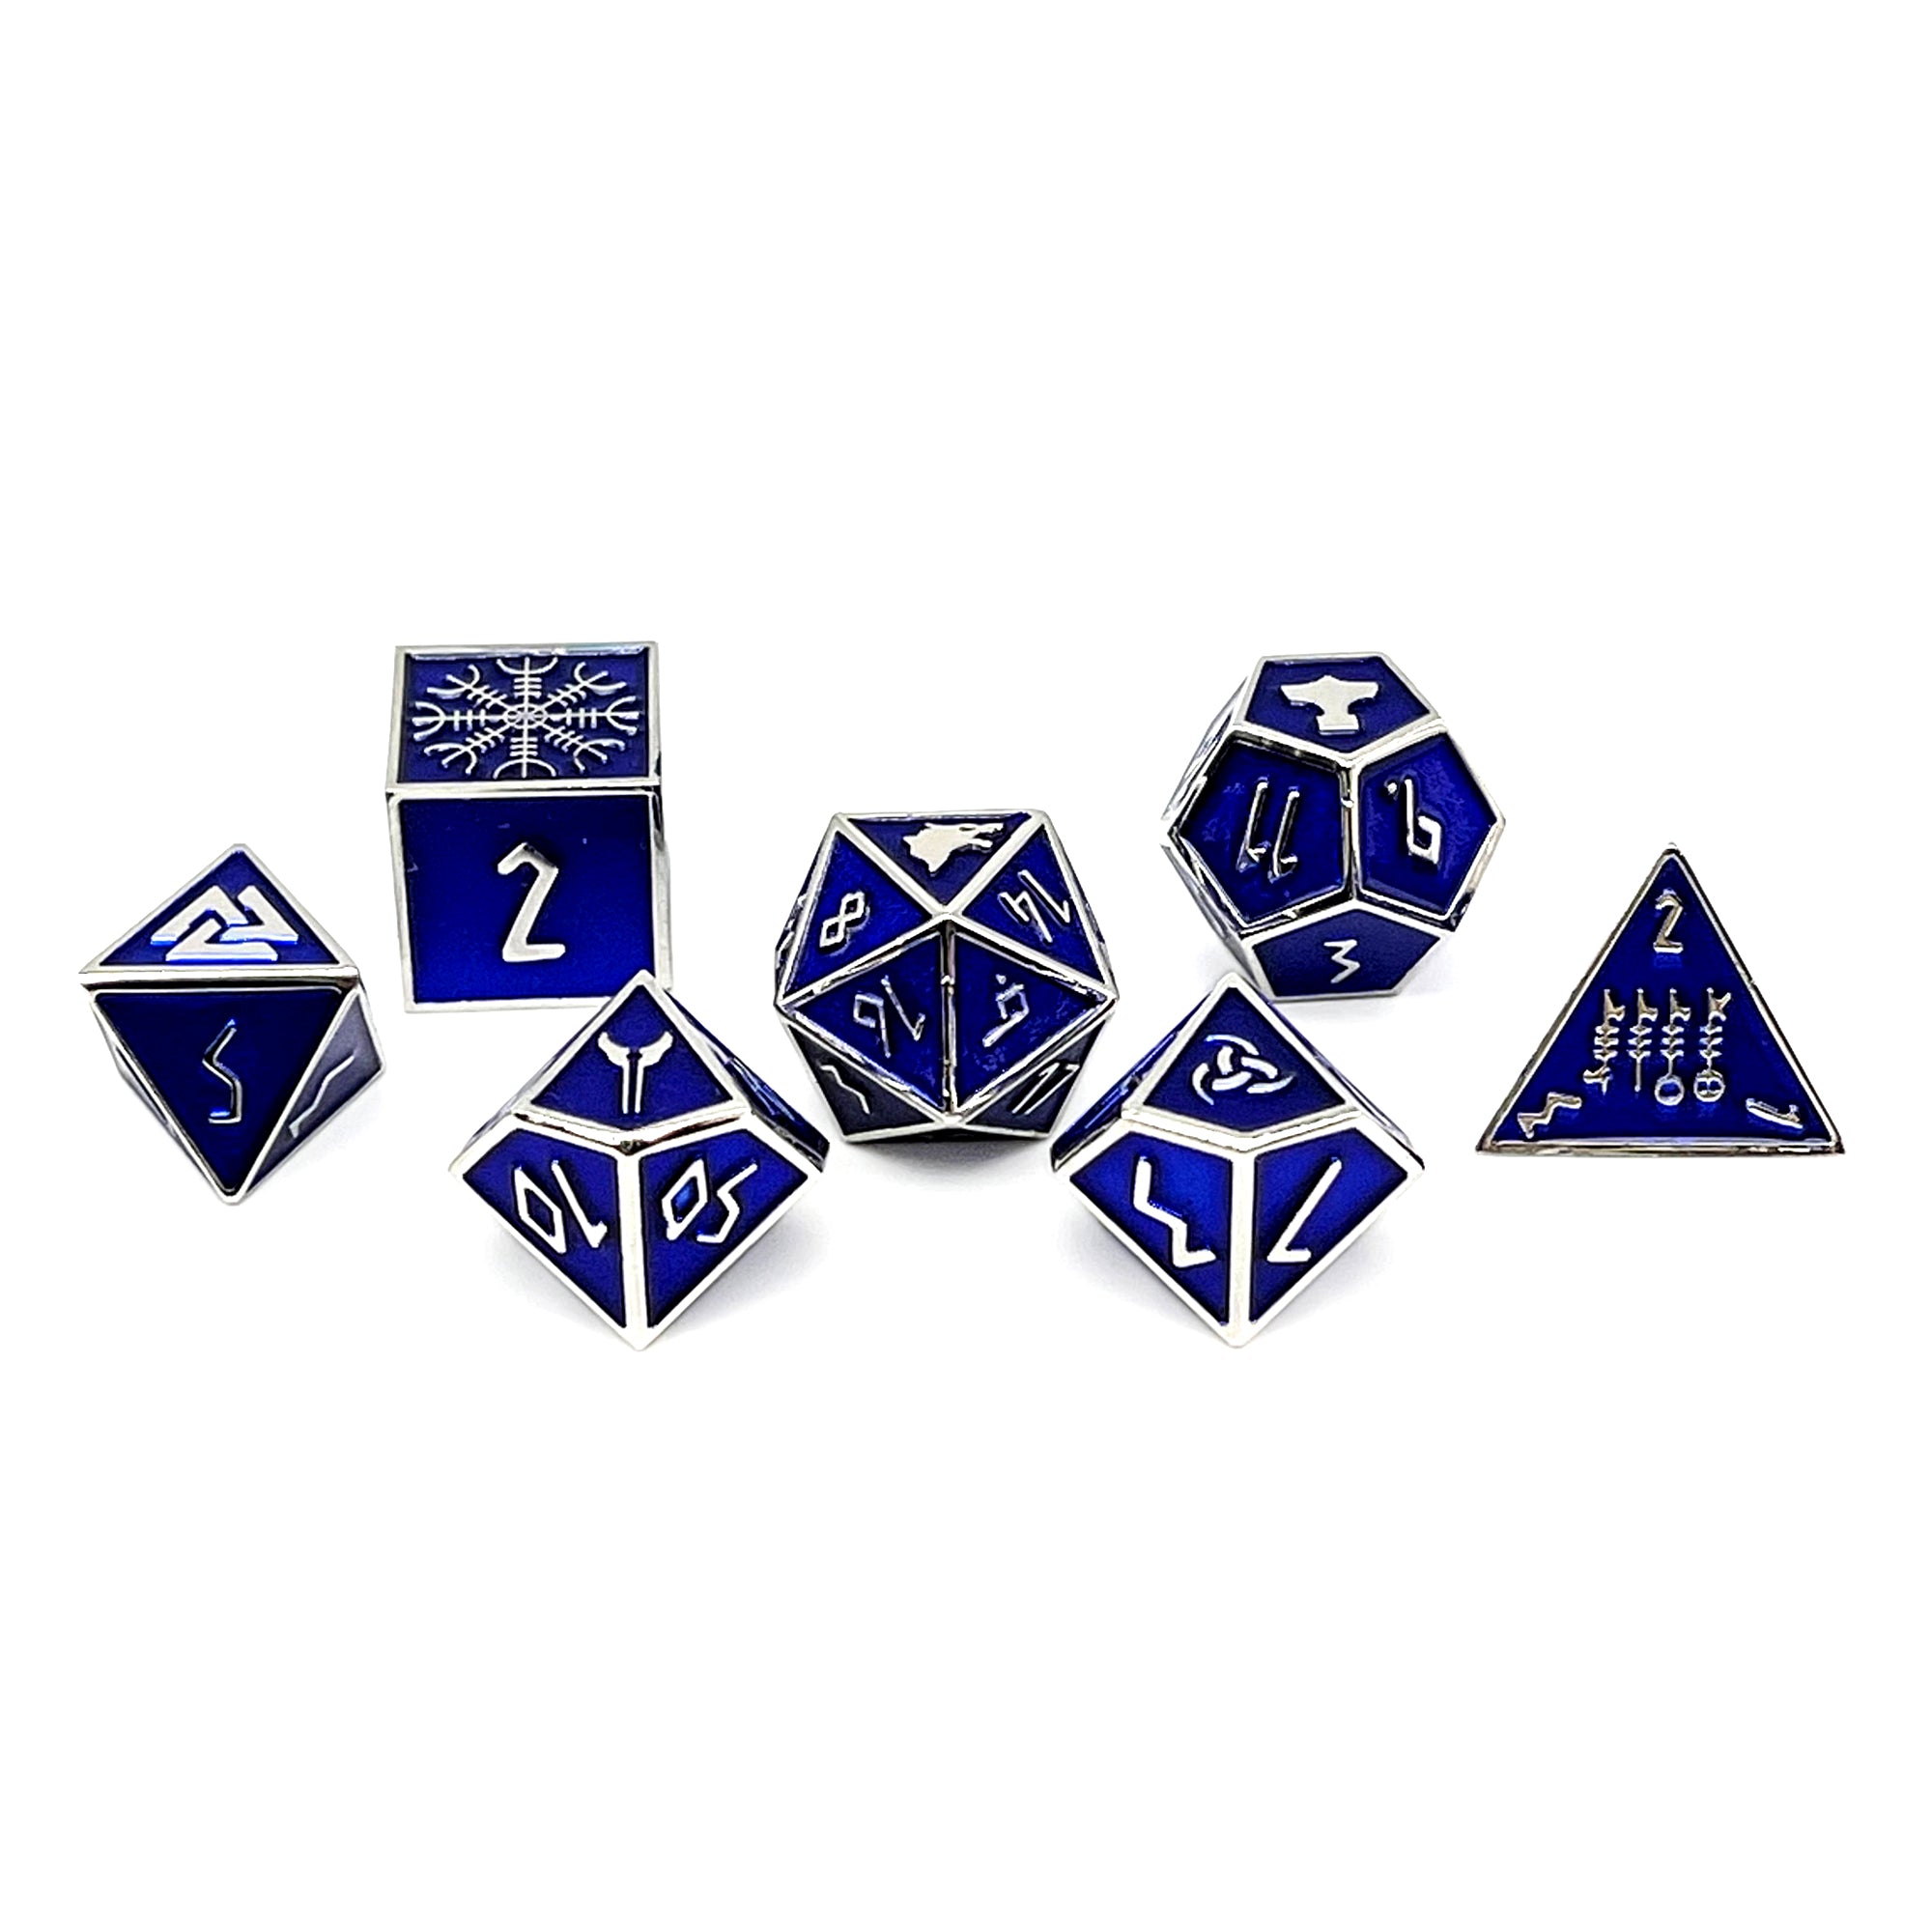 Witches Fire - Norse Themed Metal Dice Set